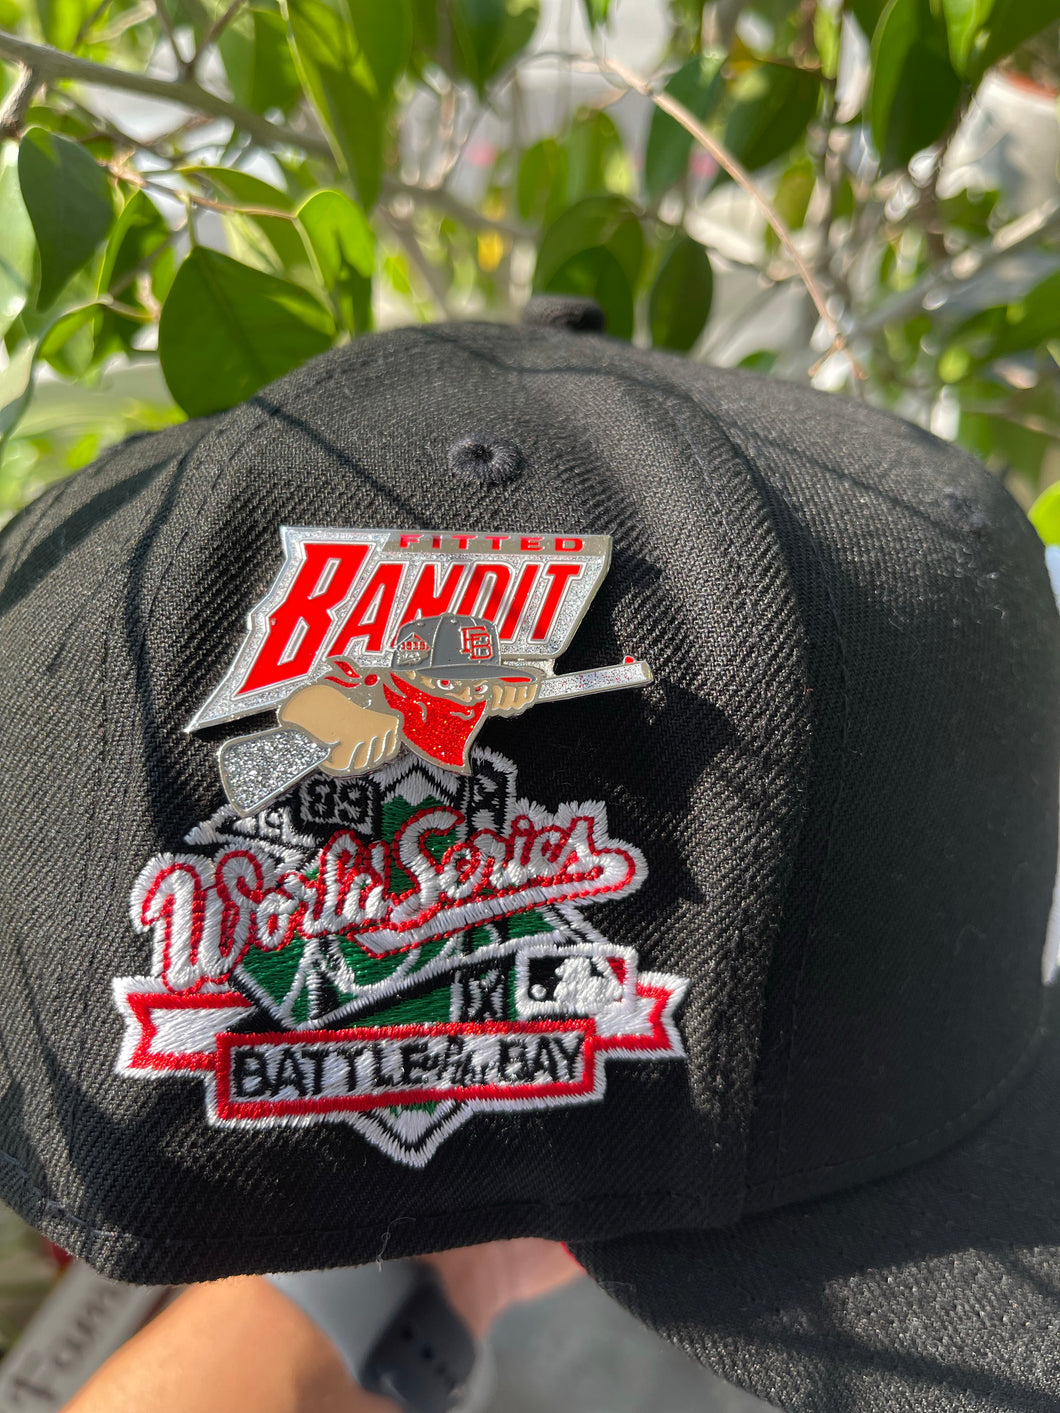 Loui V Fitted Bandit (shooter pin)  + sticker